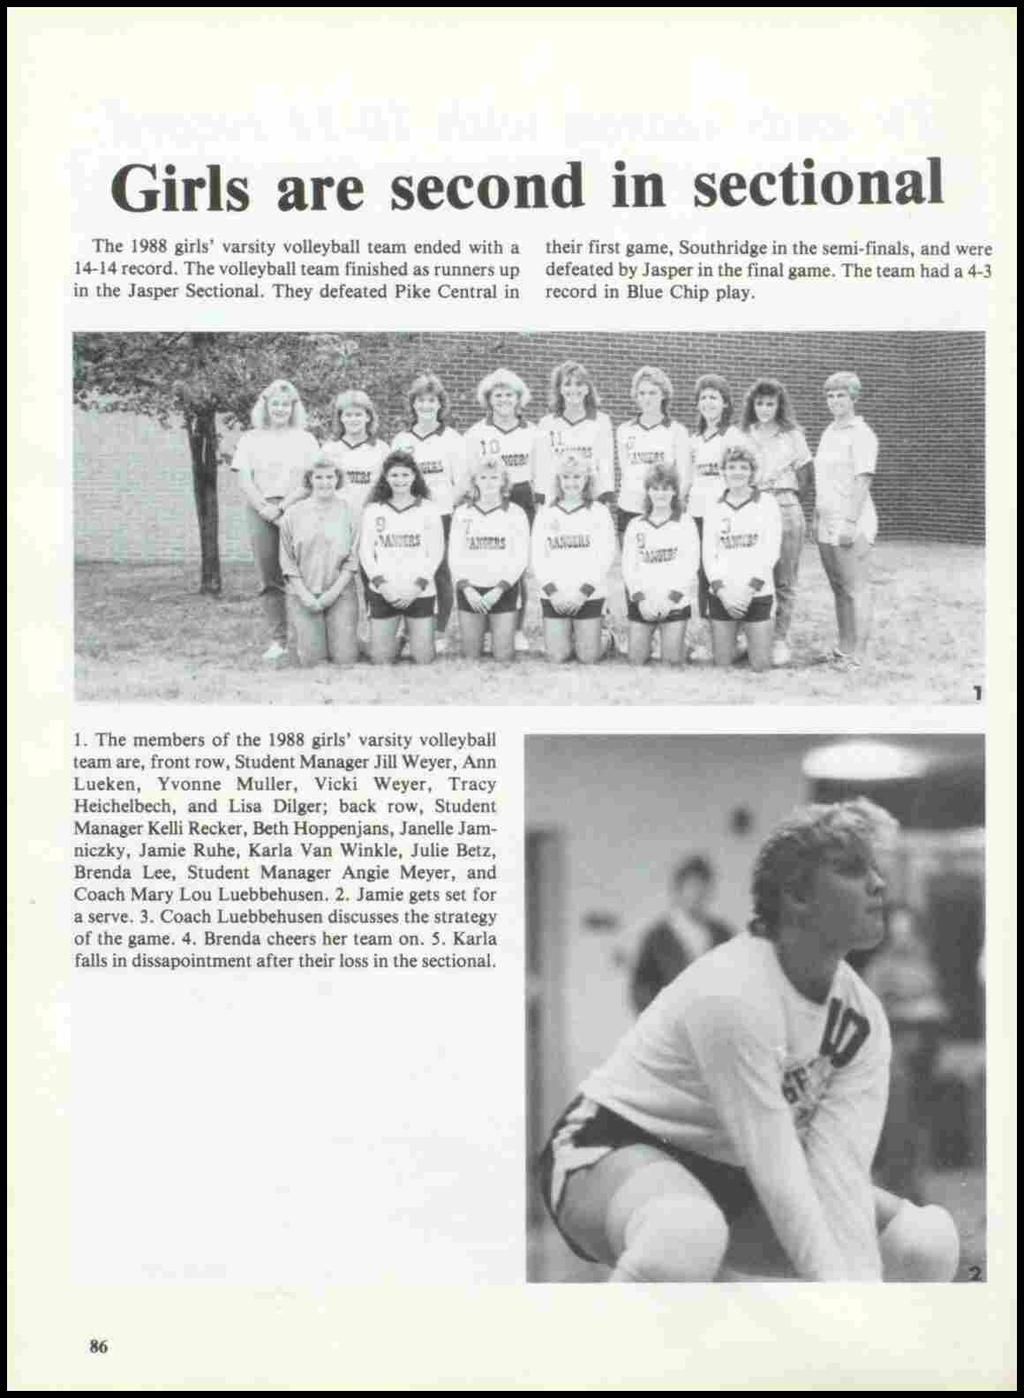 Girls are second in sectional The 1988 girls' varsity volleyball team ended with a 14-14 record. The volleyball team finished as runners up in the Jasper Sectional.